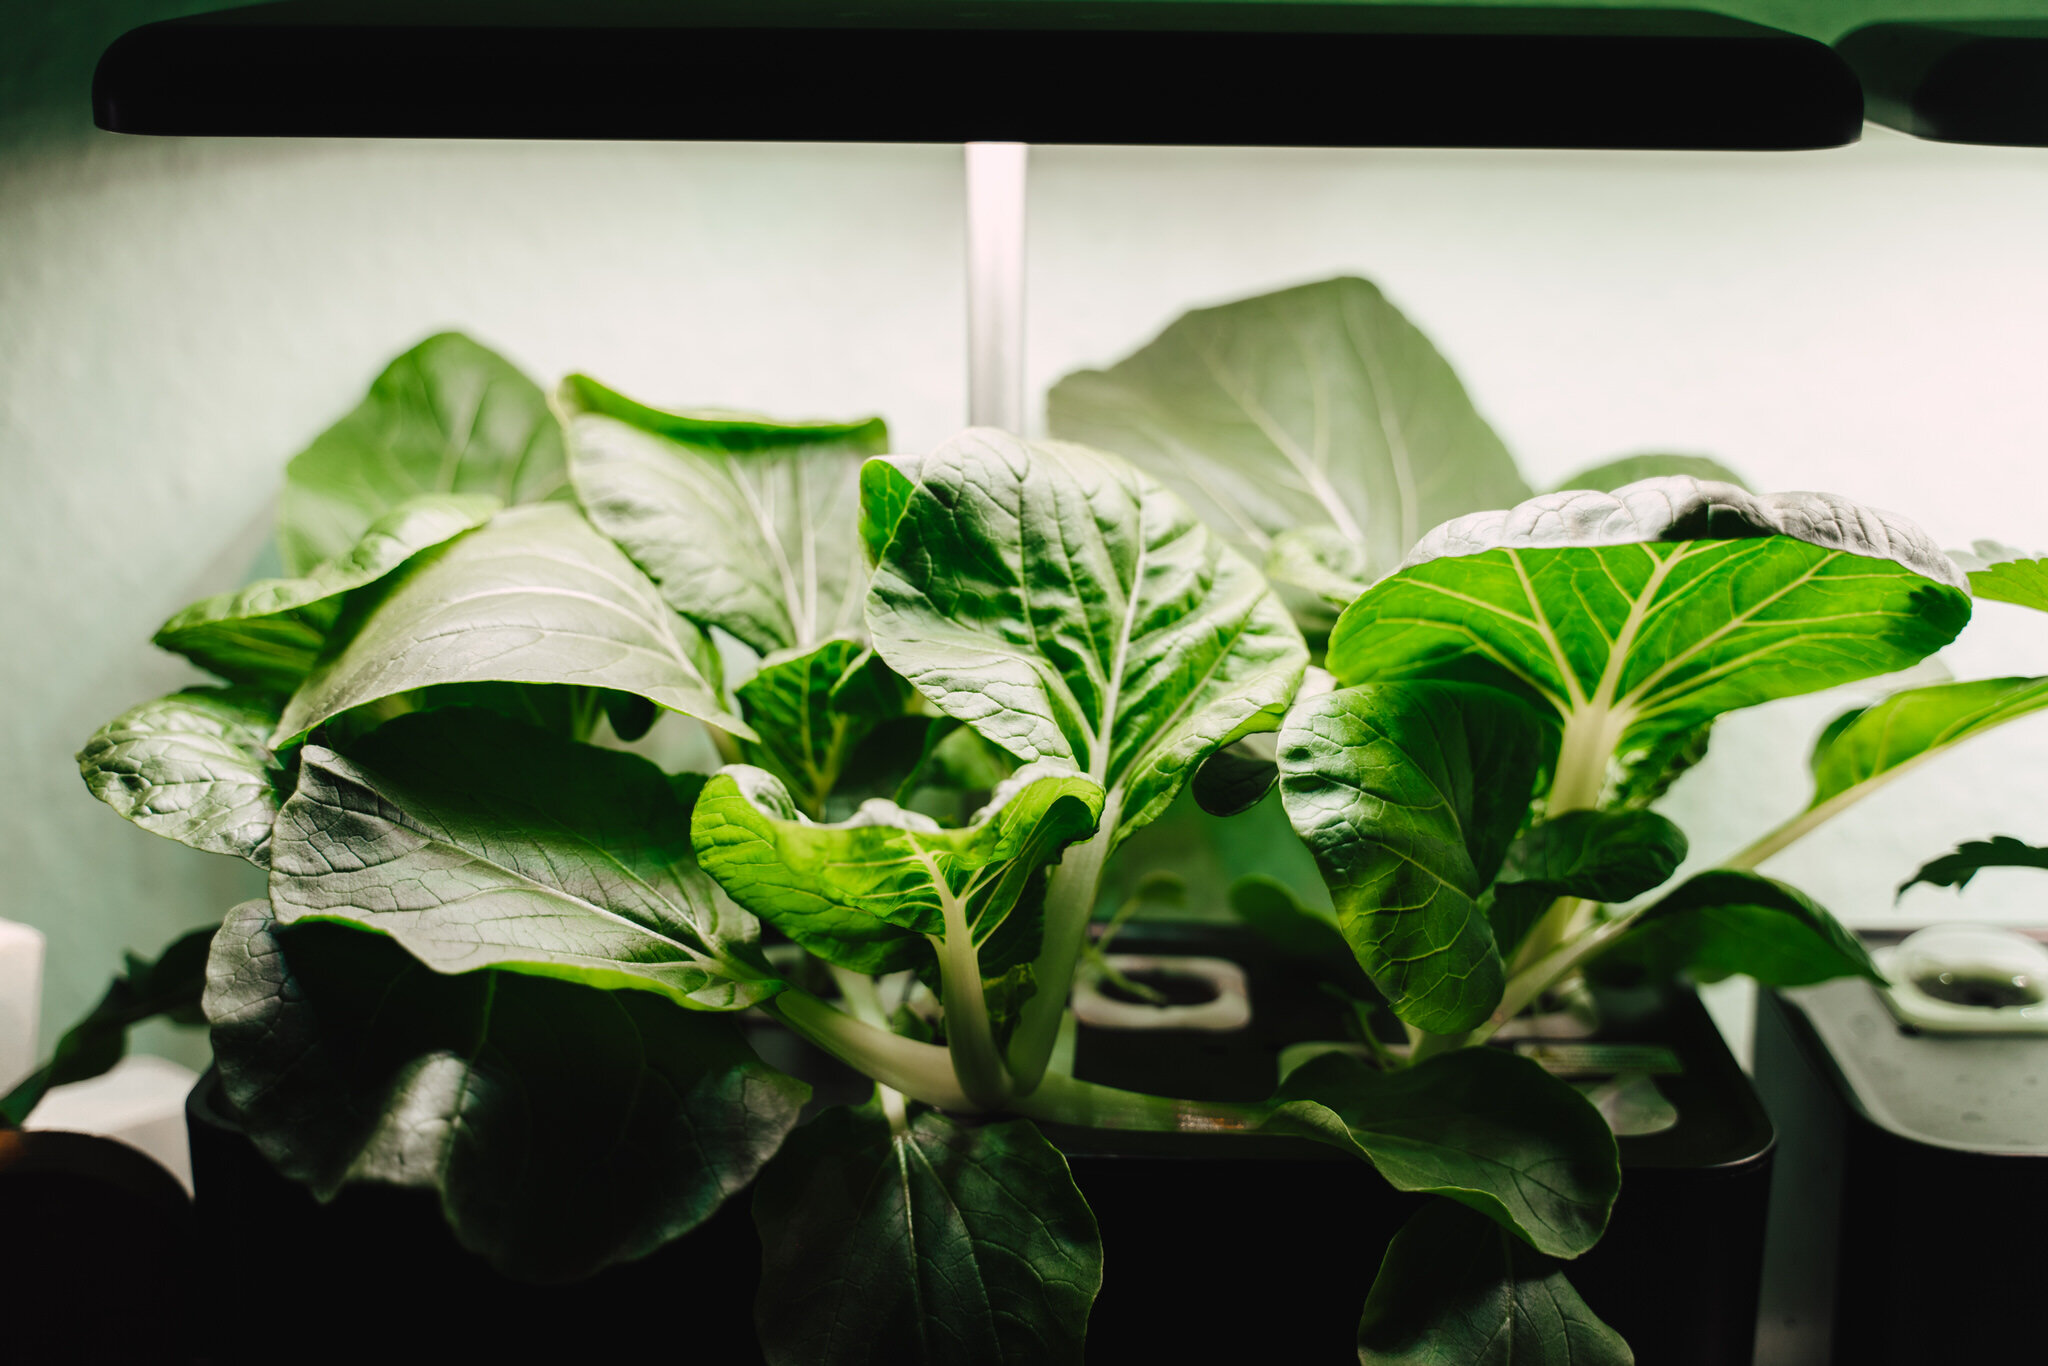 Growing Vegetables Indoors Without Soil nor Sun - Hydroponic Systems 64.JPG